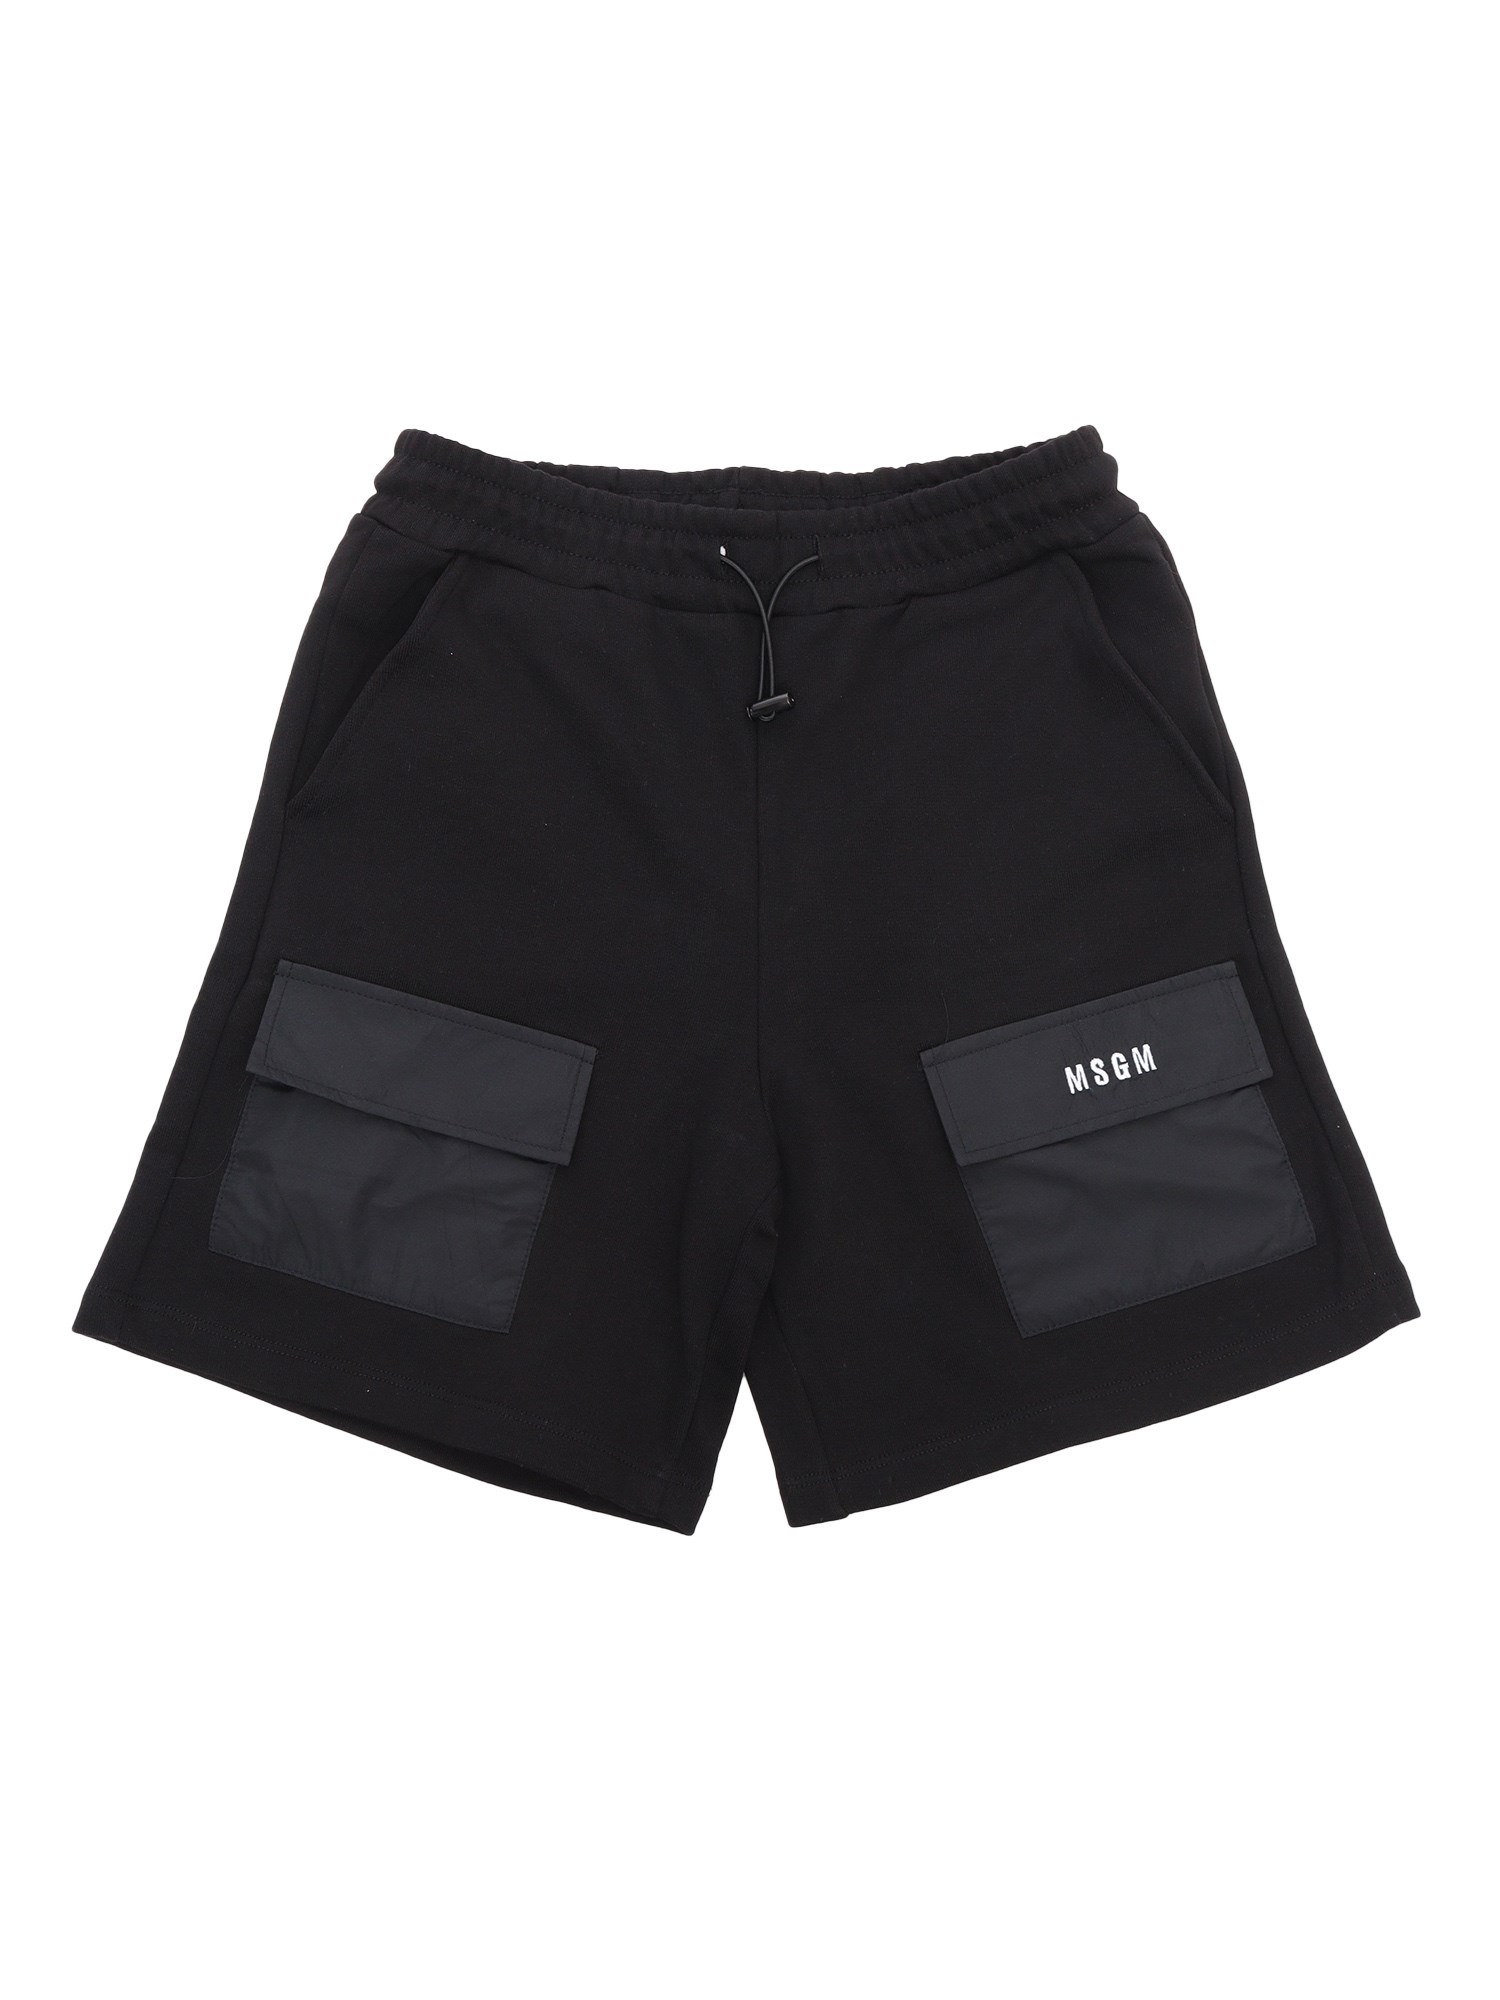 Msgm Black Shorts For Girls With Patch Pockets On The Front, Elas